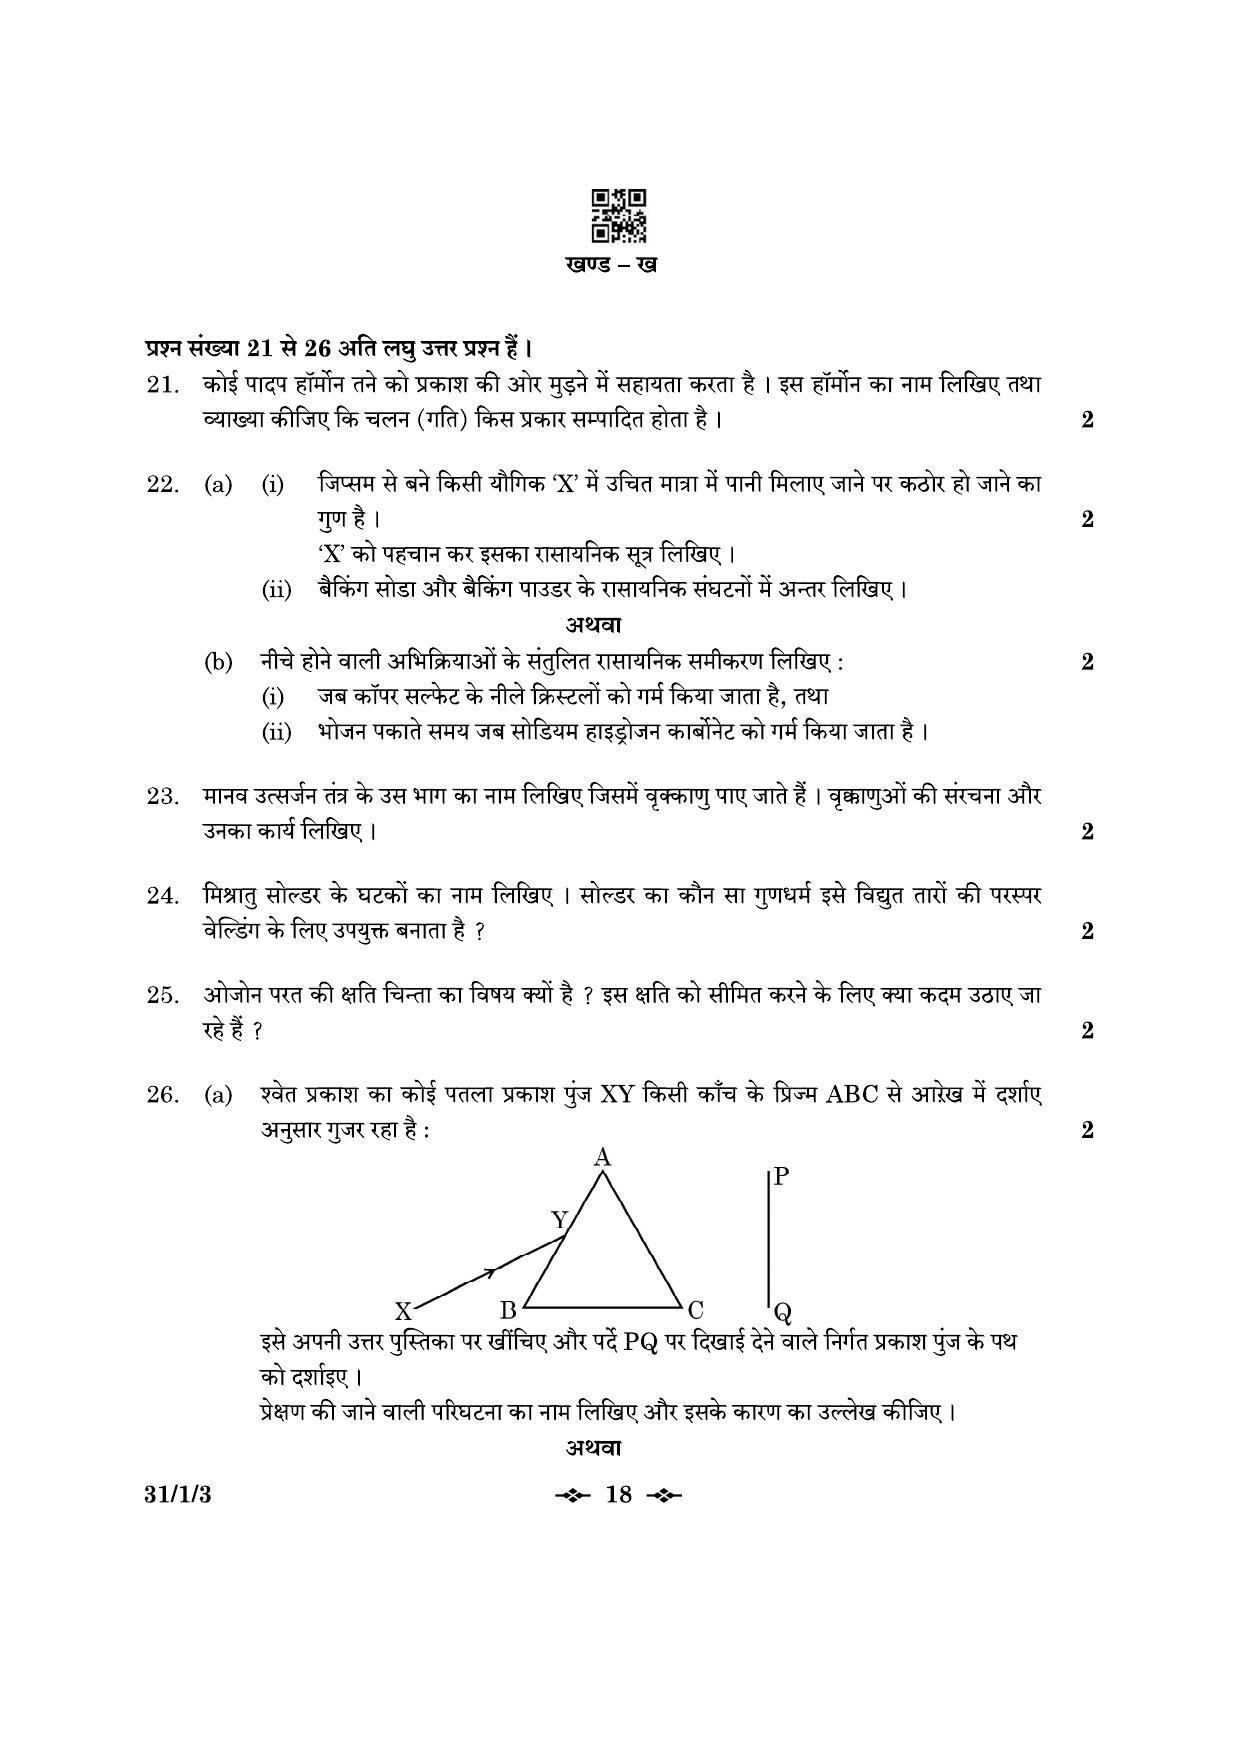 CBSE Class 10 31-1-3 Science 2023 Question Paper - Page 18